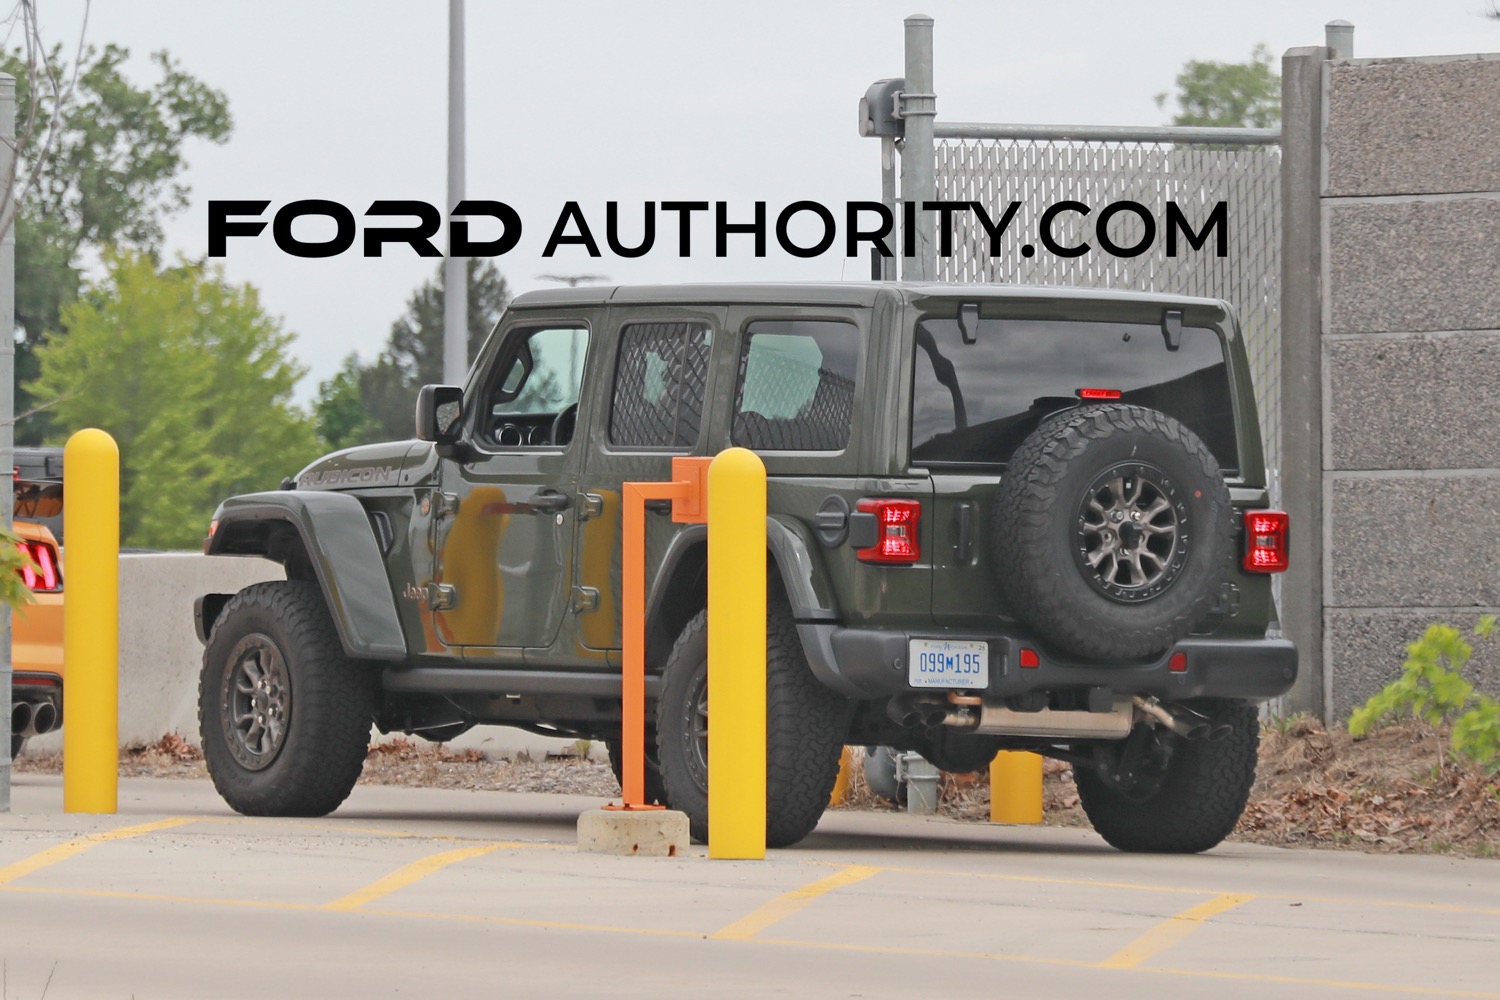 Ford Benchmarking Jeep Wrangler Rubicon 392: Real World Gallery